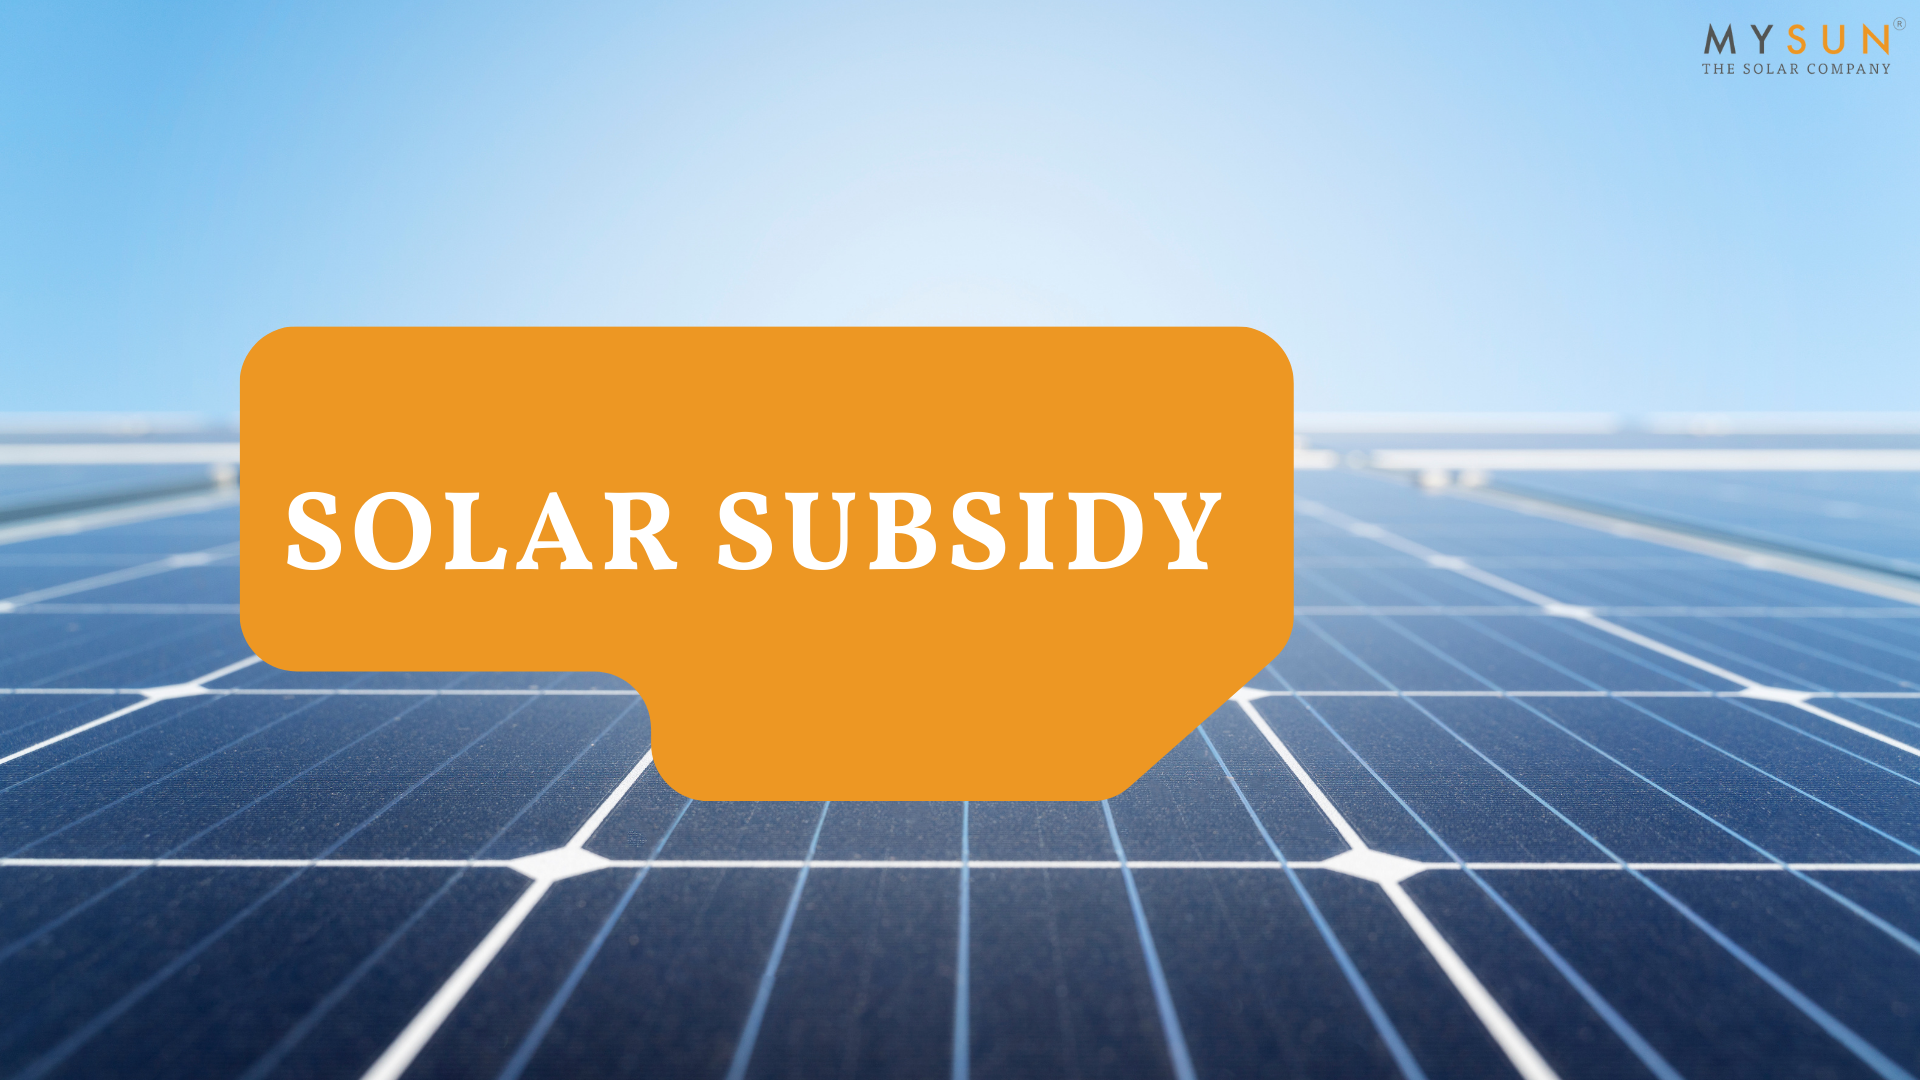 Big announcement on Solar Subsidy for Homes Rediscover the Sun with